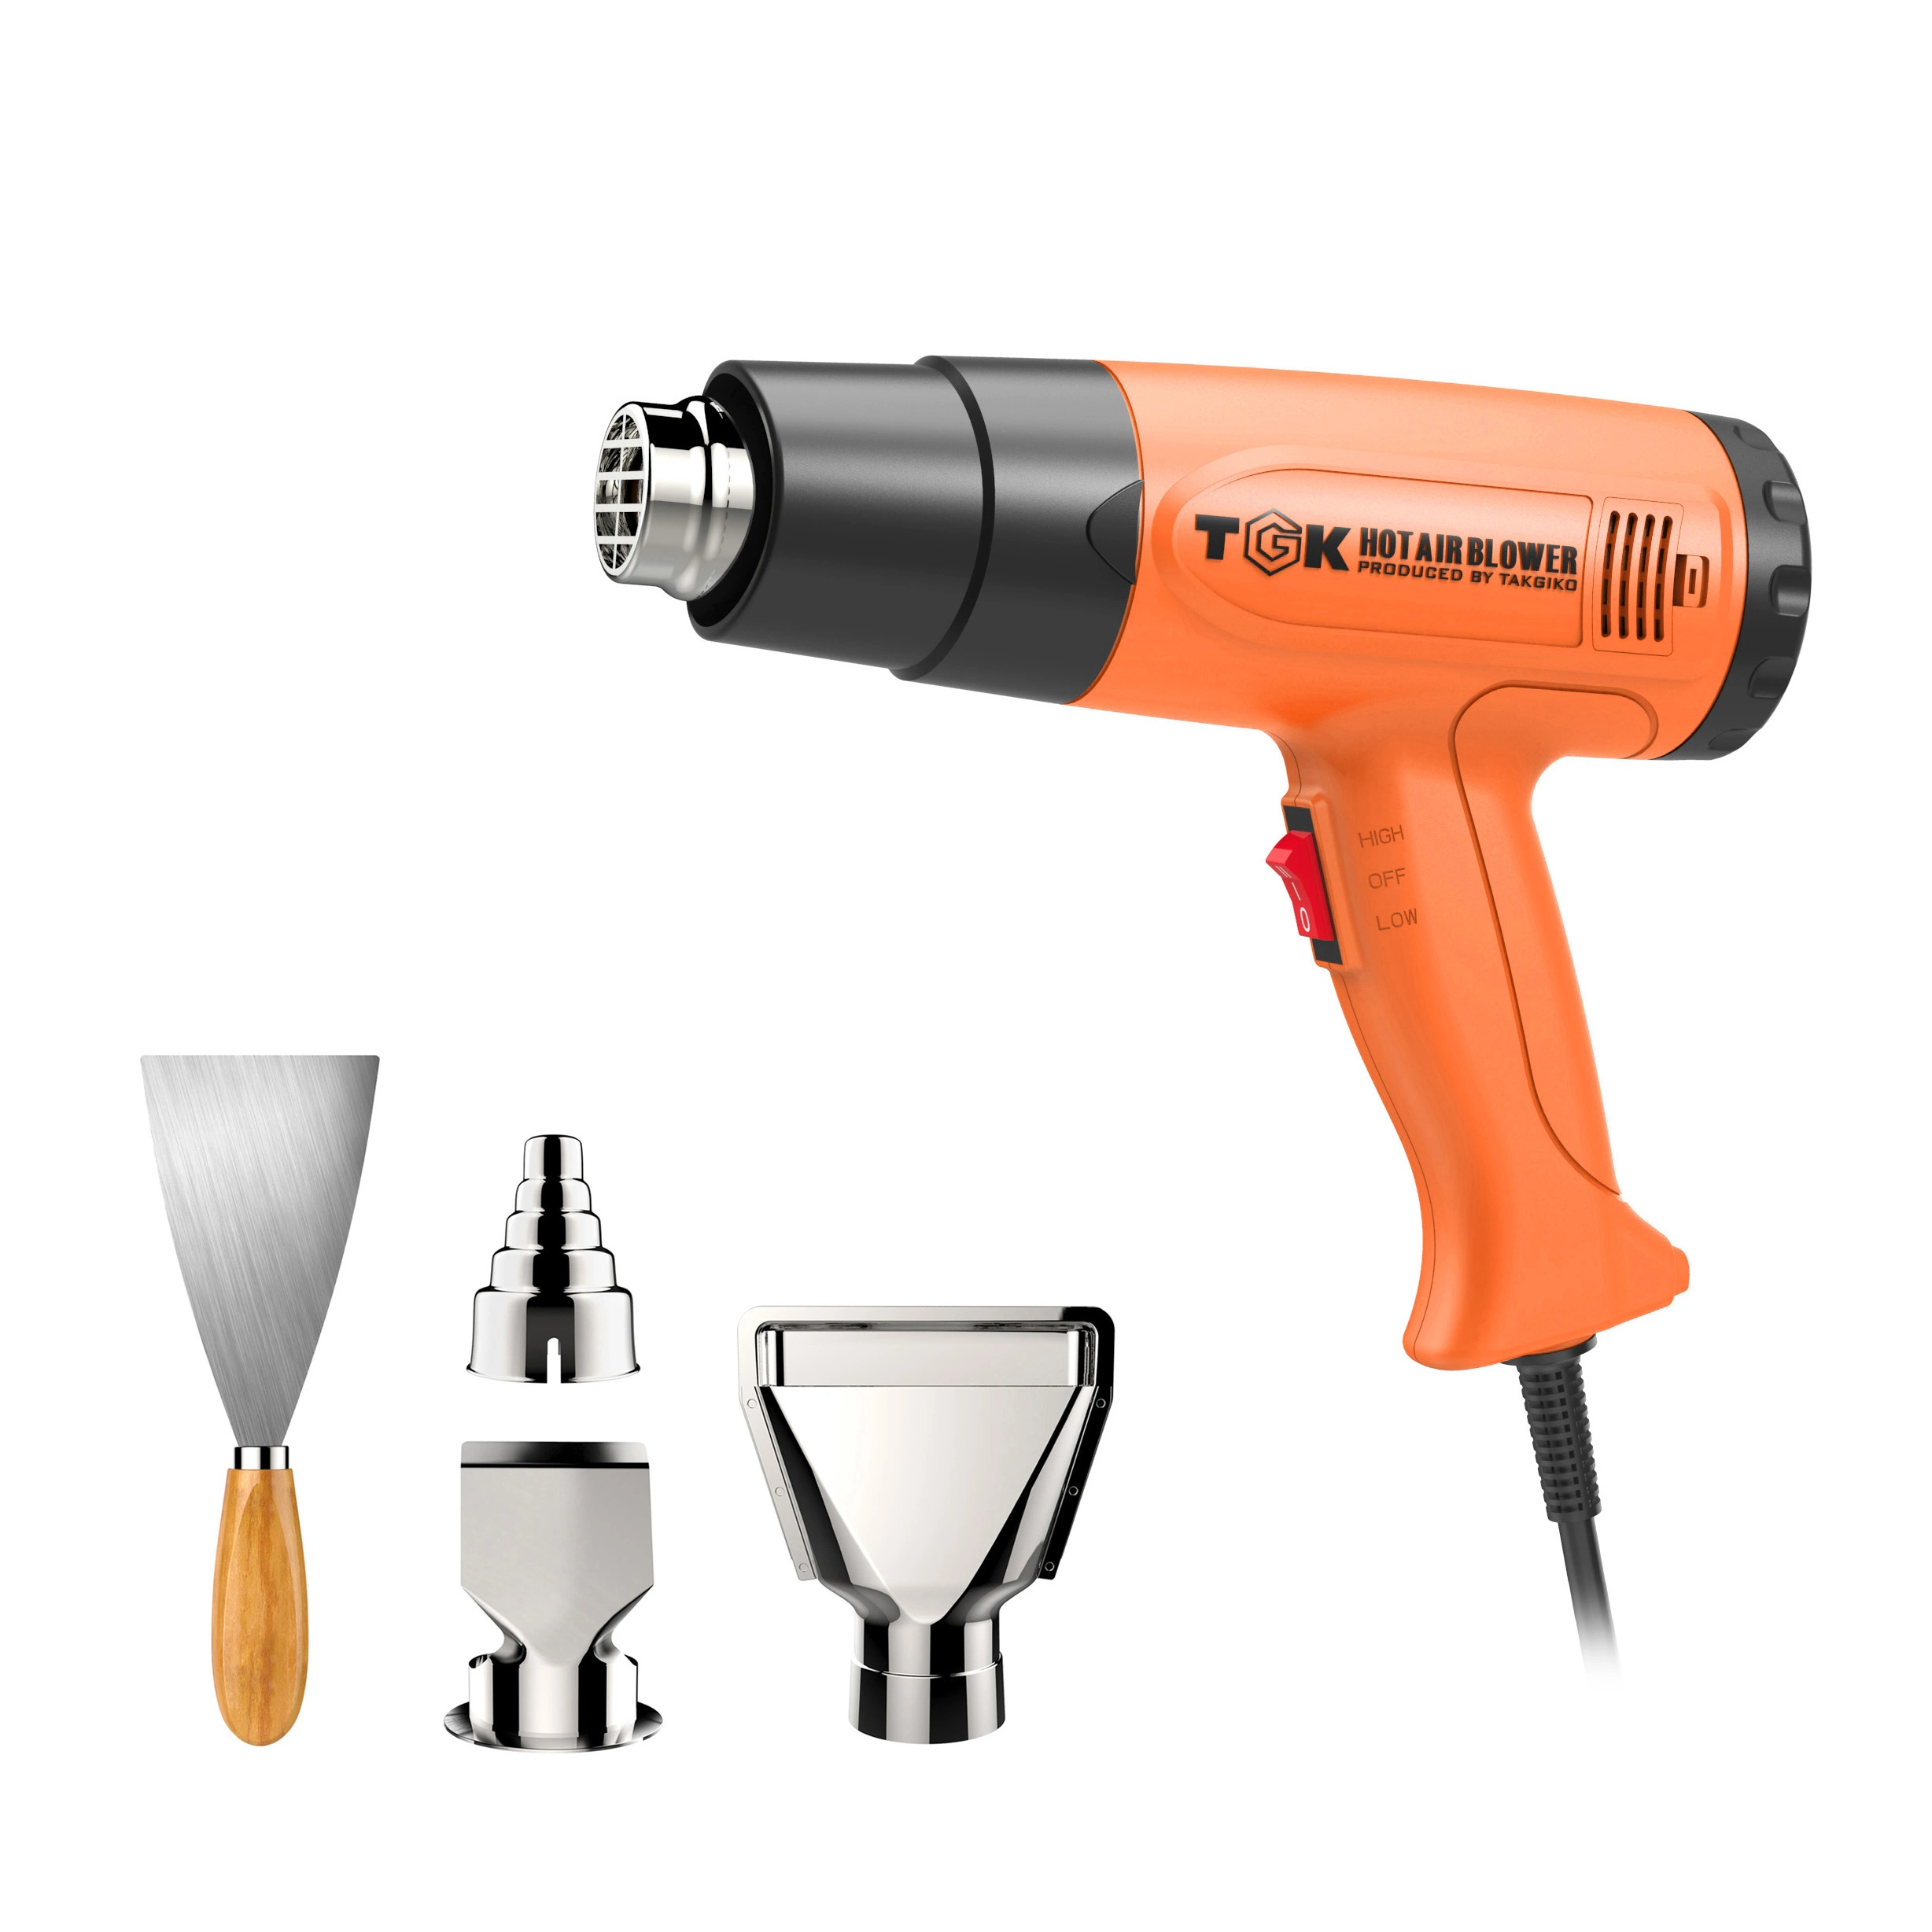 1800W Industrial Electric Shrink Wrap Heat Gun for Remove Paint Hg6618s